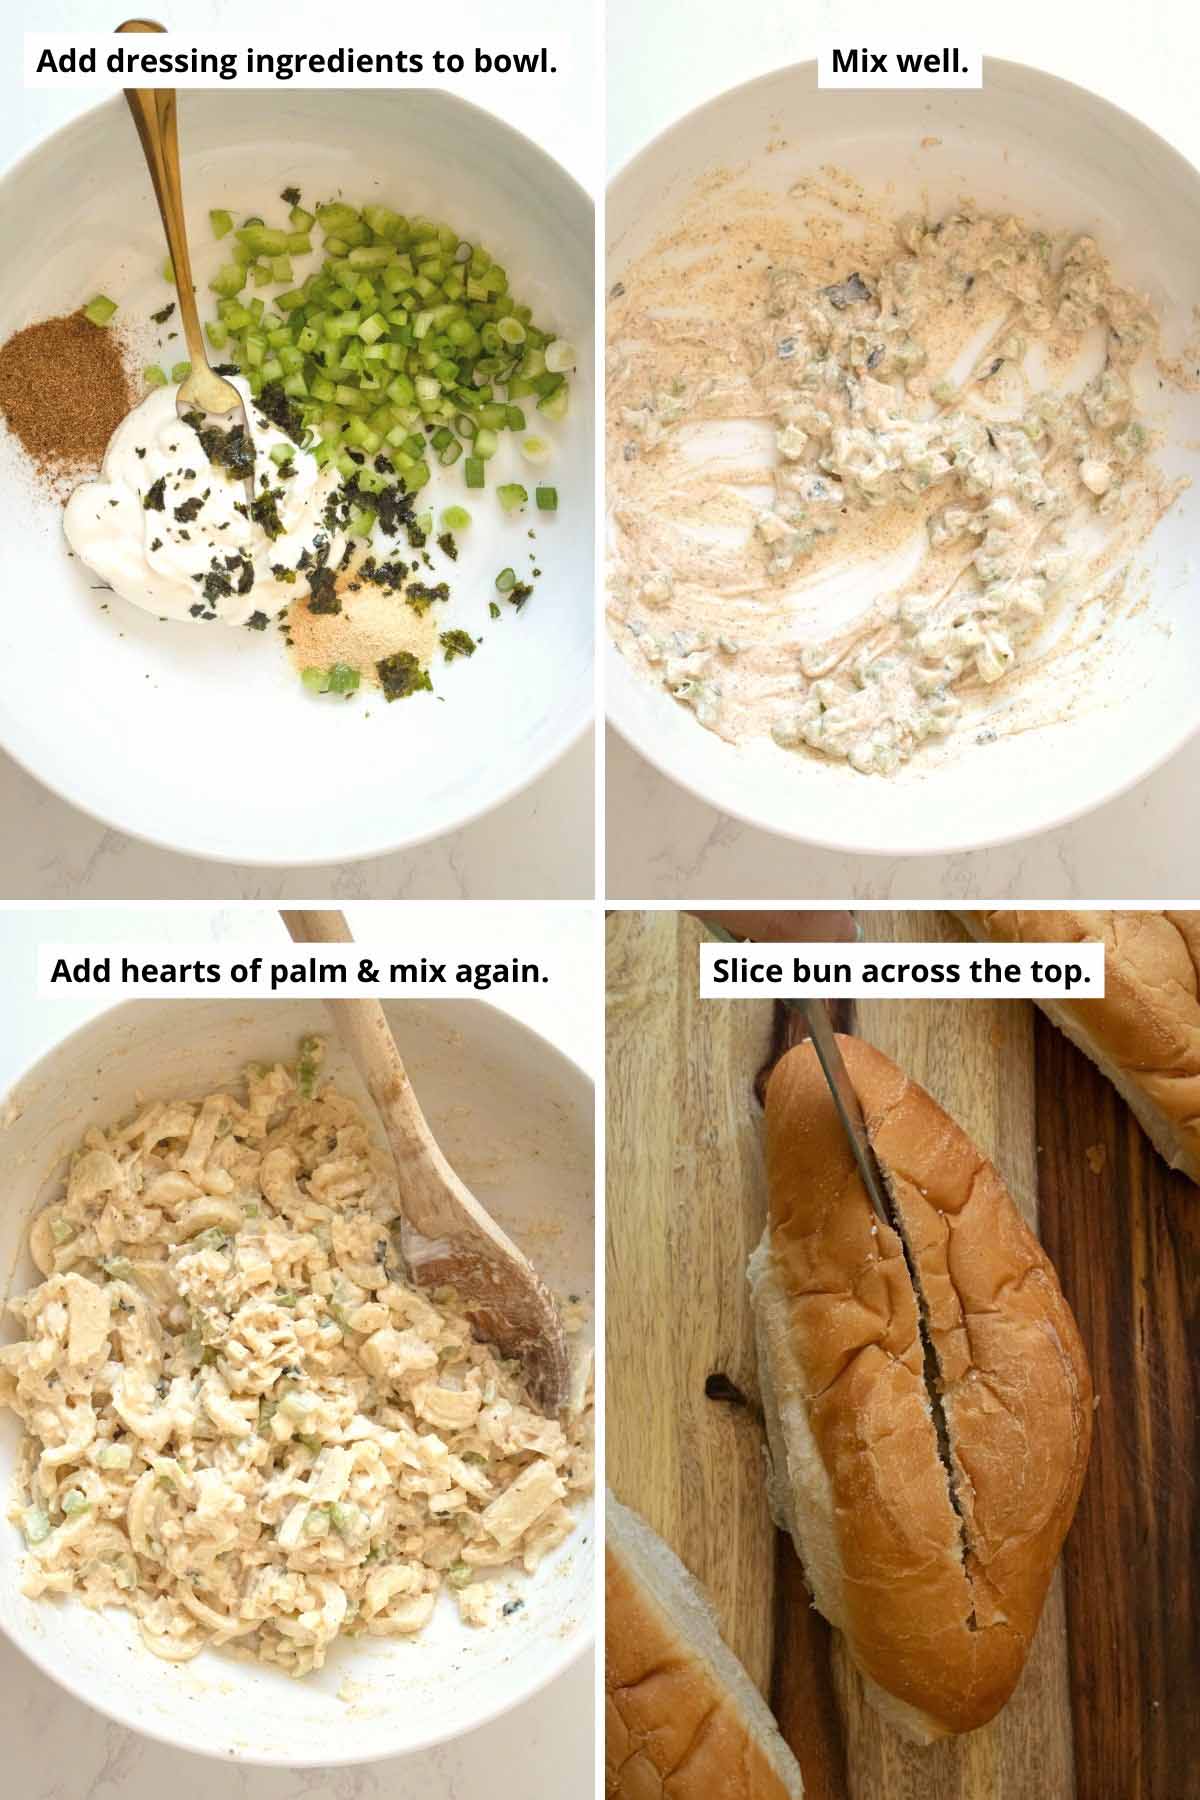 image collage of dressing ingredients in a bowl before and after mixing, the vegan lobster salad all mixed up, and a knife slicing into the top of a roll